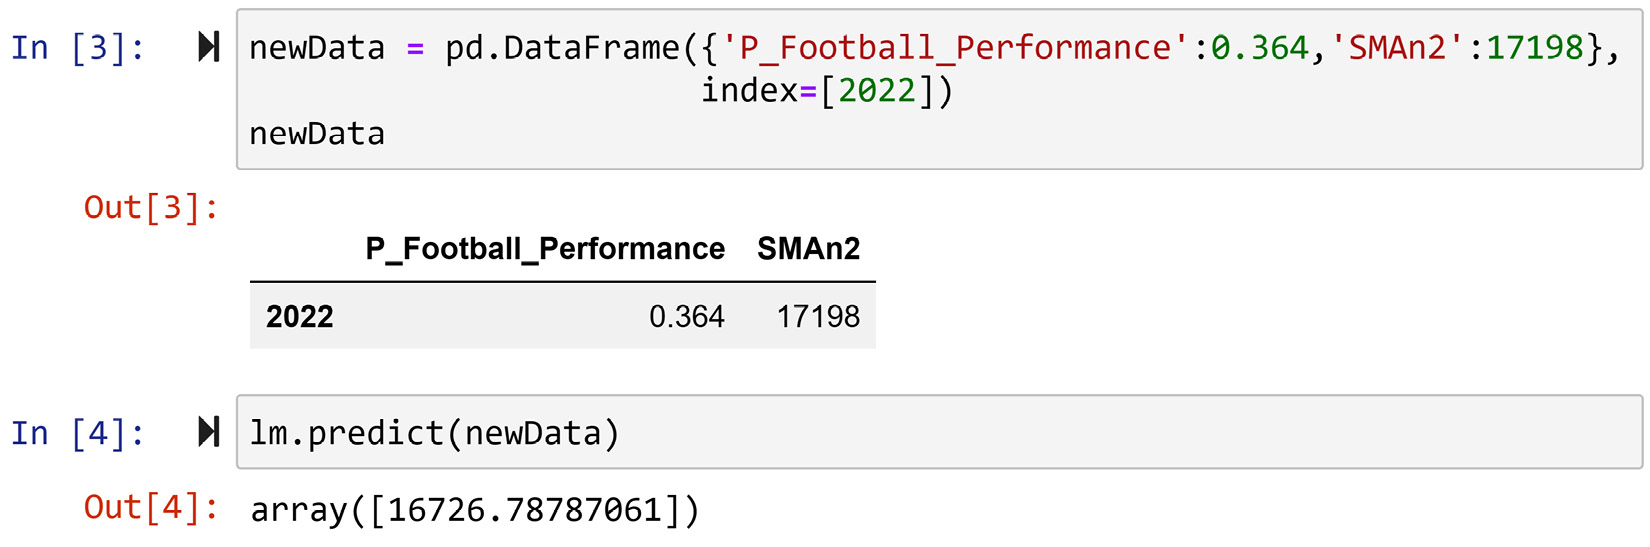 Figure 6.7 – Calculating the number of applications for 2022 using the .predict() function
